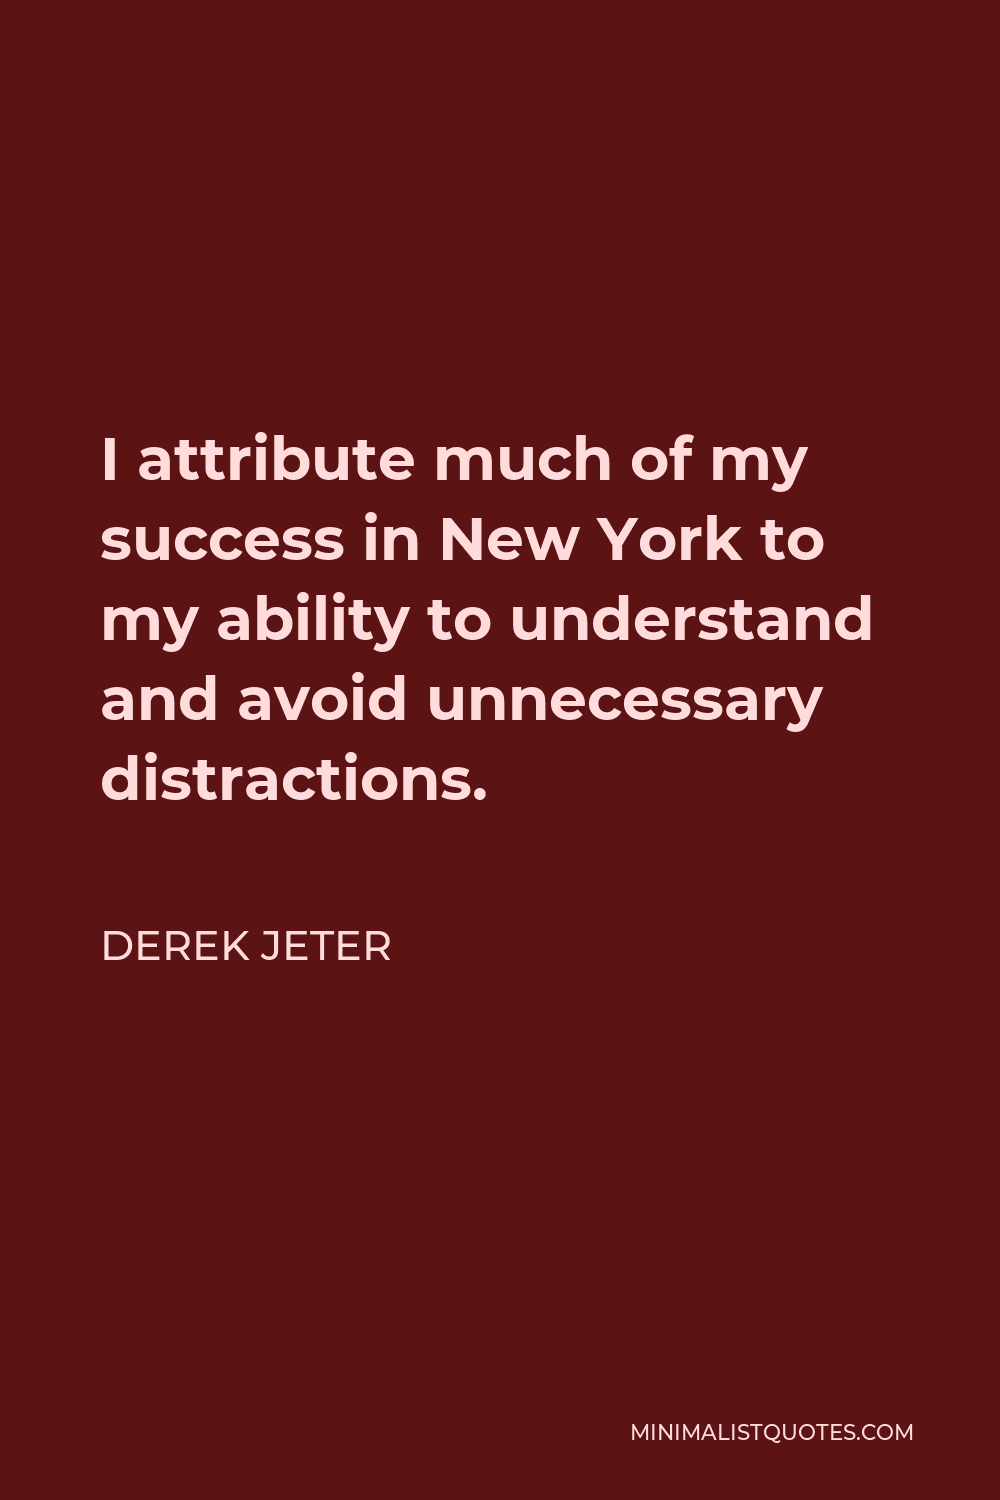 Derek Jeter Quote - I attribute much of my success in New York to my ability to understand and avoid unnecessary distractions.